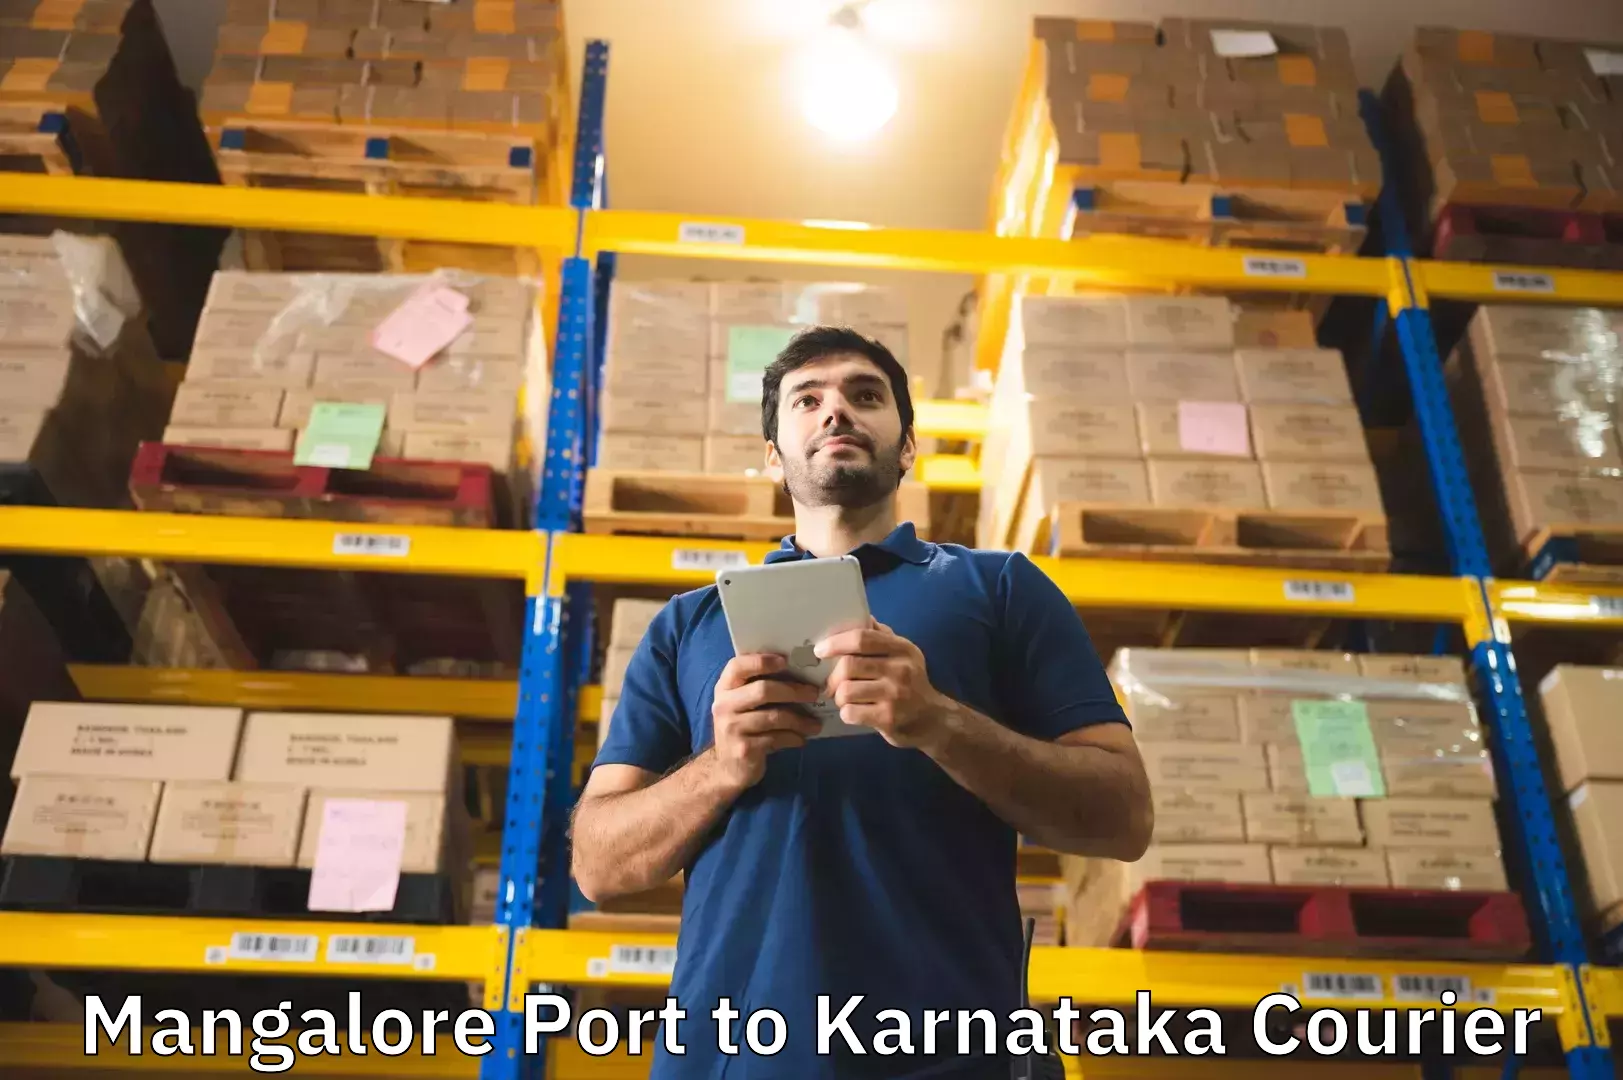 Baggage shipping service Mangalore Port to Humnabad